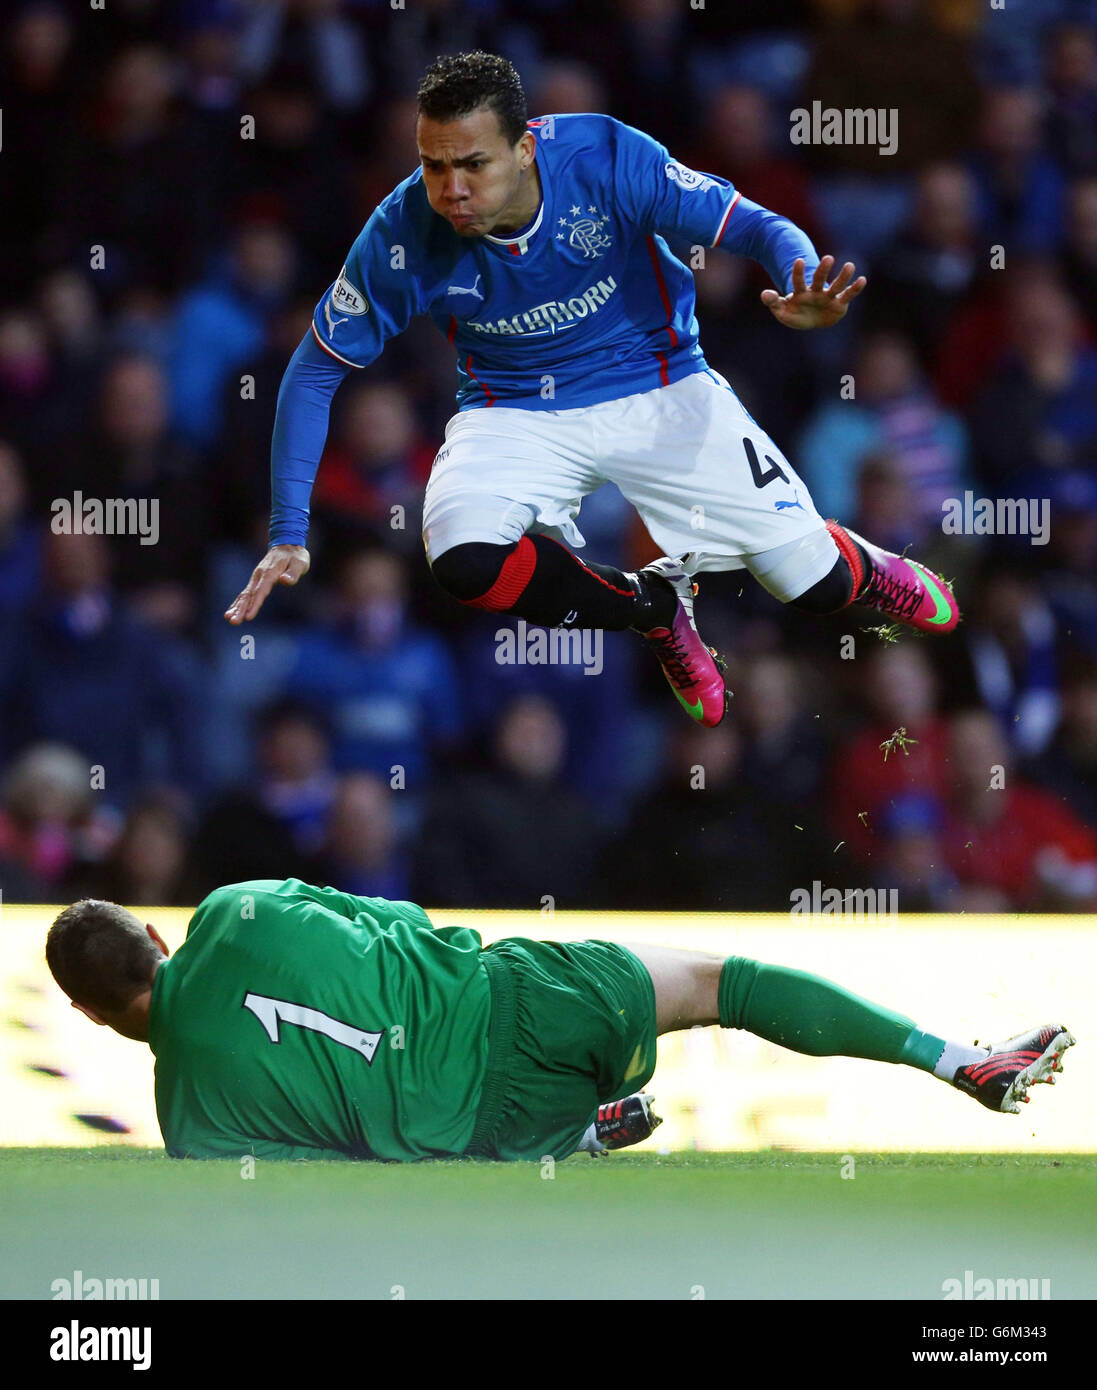 Soccer - Scottish League One - Rangers v Ayr - Ibrox Stadium. Rangers Arnold Peralta jumps over Ayr's David Hutton during the Scottish League One match at Ibrox Stadium, Glasgow. Stock Photo